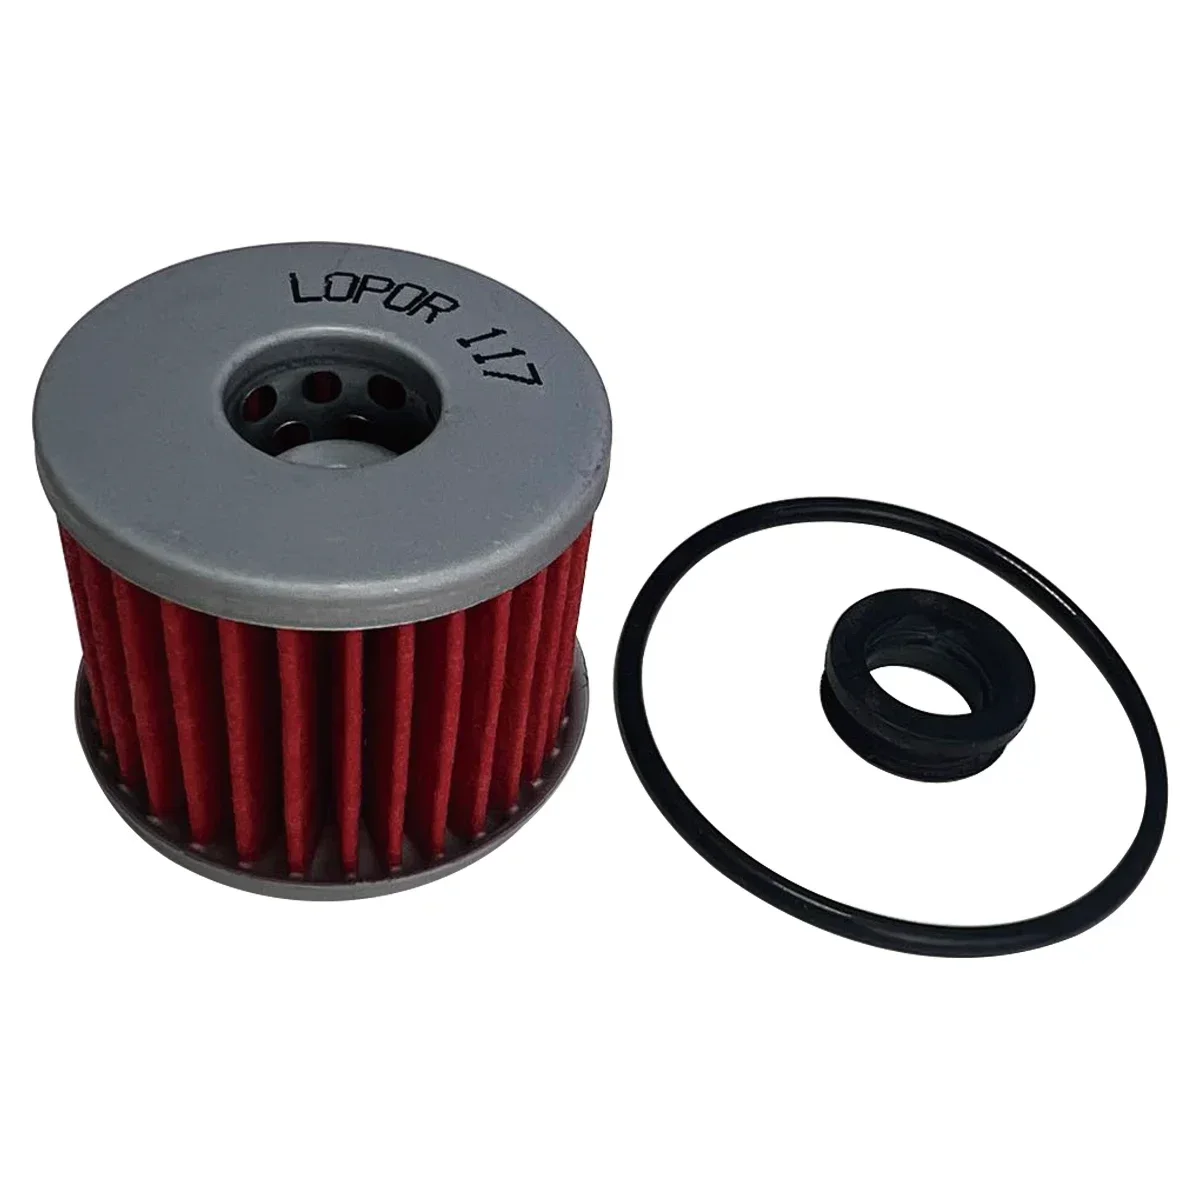 Motorcycle Oil Filter For Honda Scooter C125 A Super Cub 700 Integra NSS750 M Forza DCT 750 Integra NC750 X-ADV 750 ADV750 HF117 for honda forza 750 forza750 nss750 nss 750 2021 motorcycle accessories footboard steps footrest pedal foot pegs pad plate pads